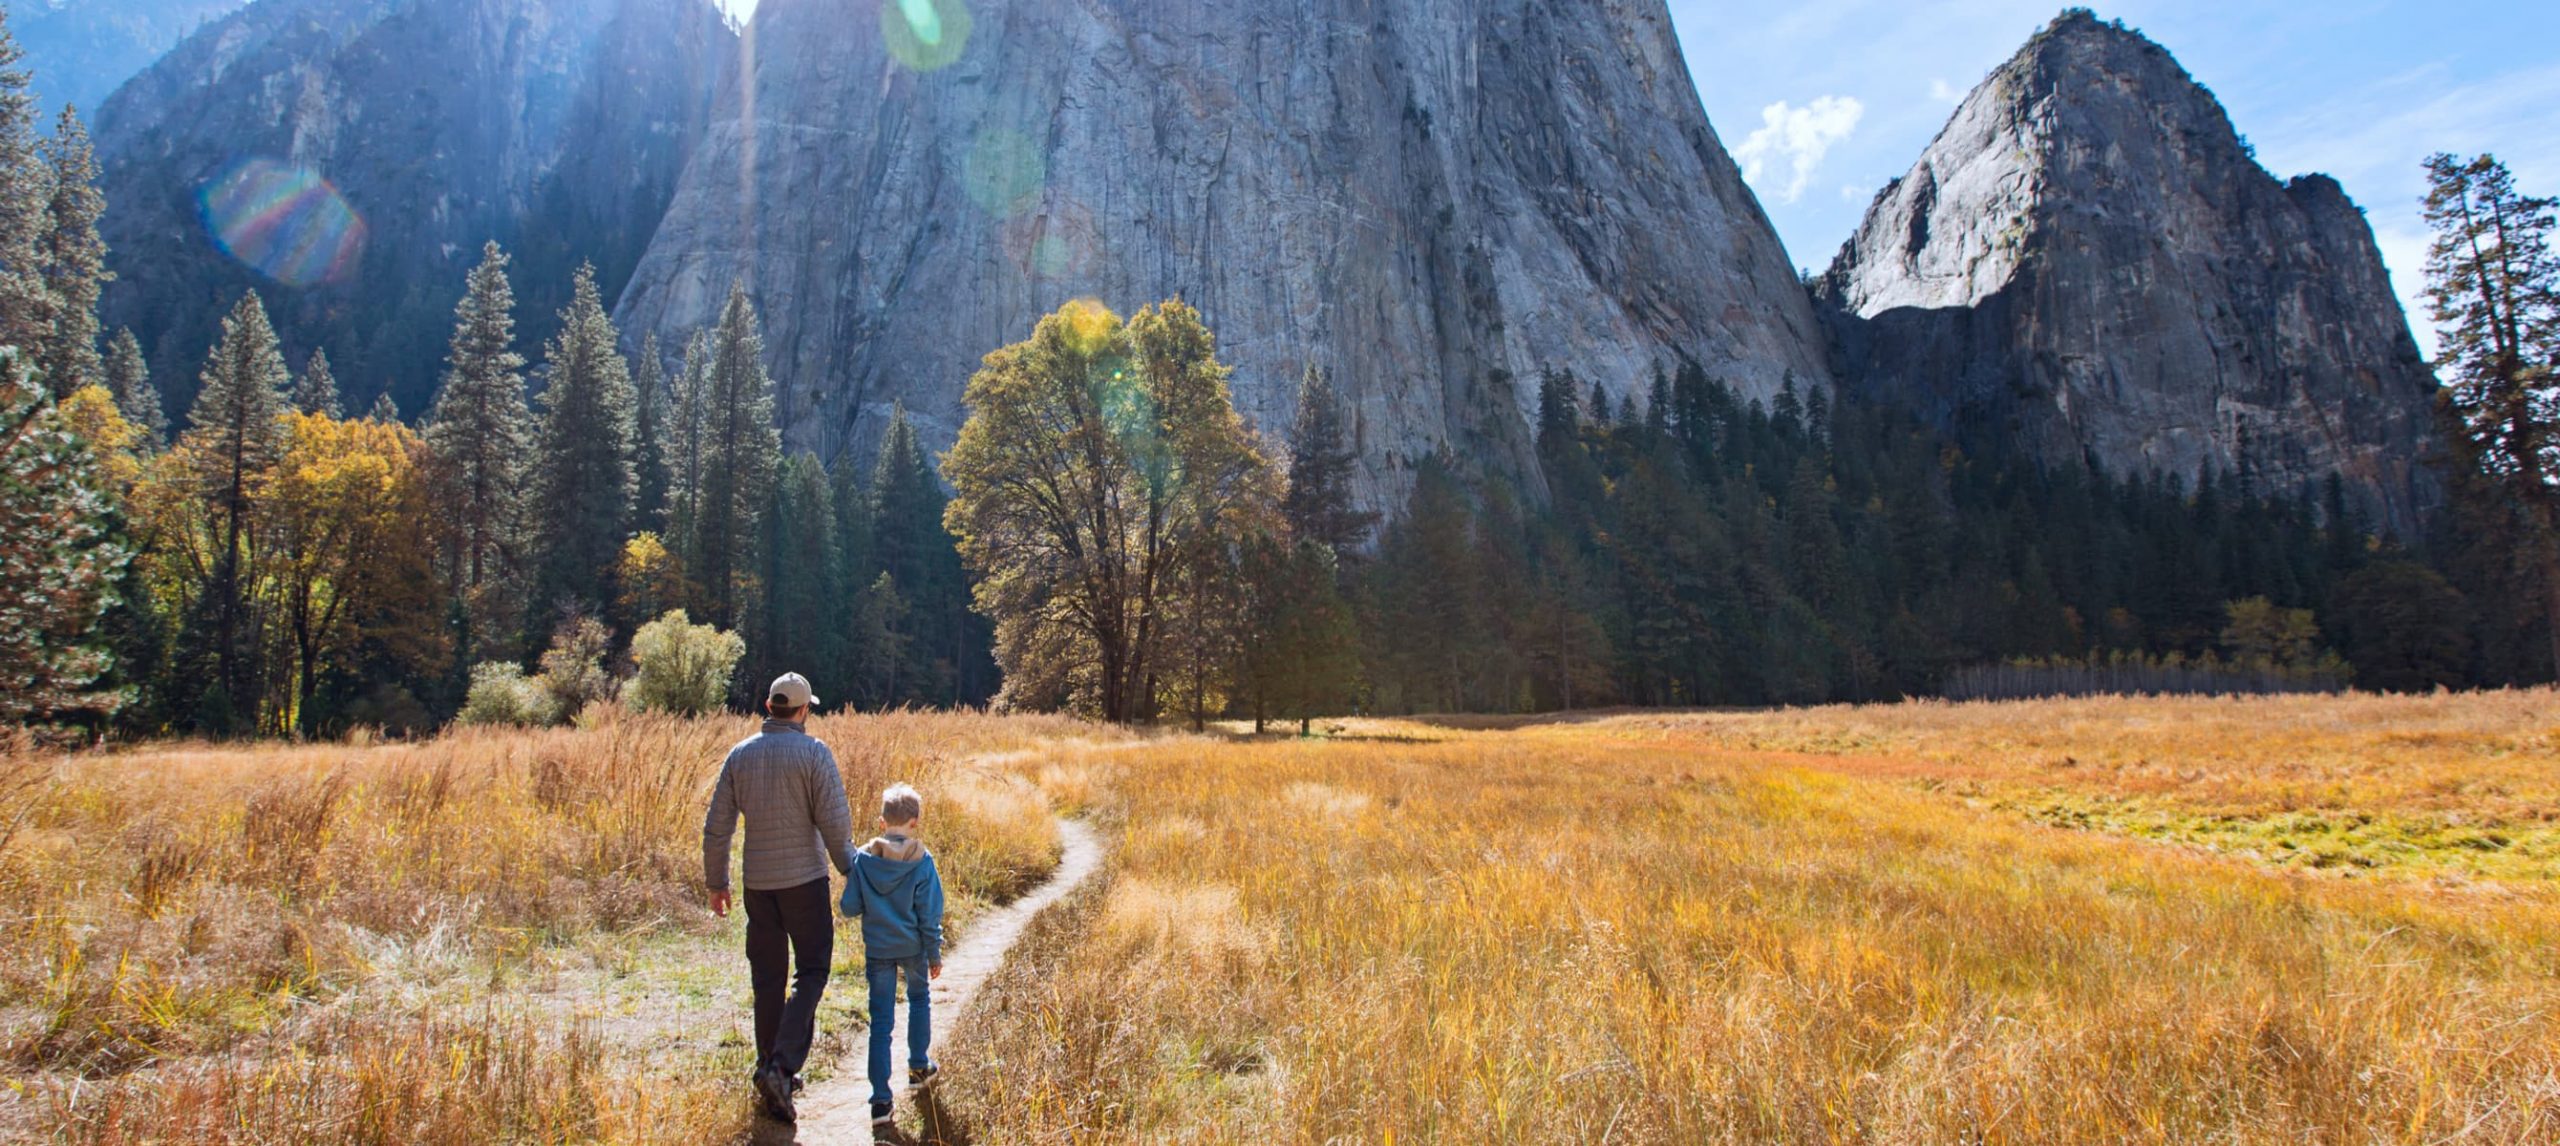 Father and son exploring the Yosemite National Park, in California.